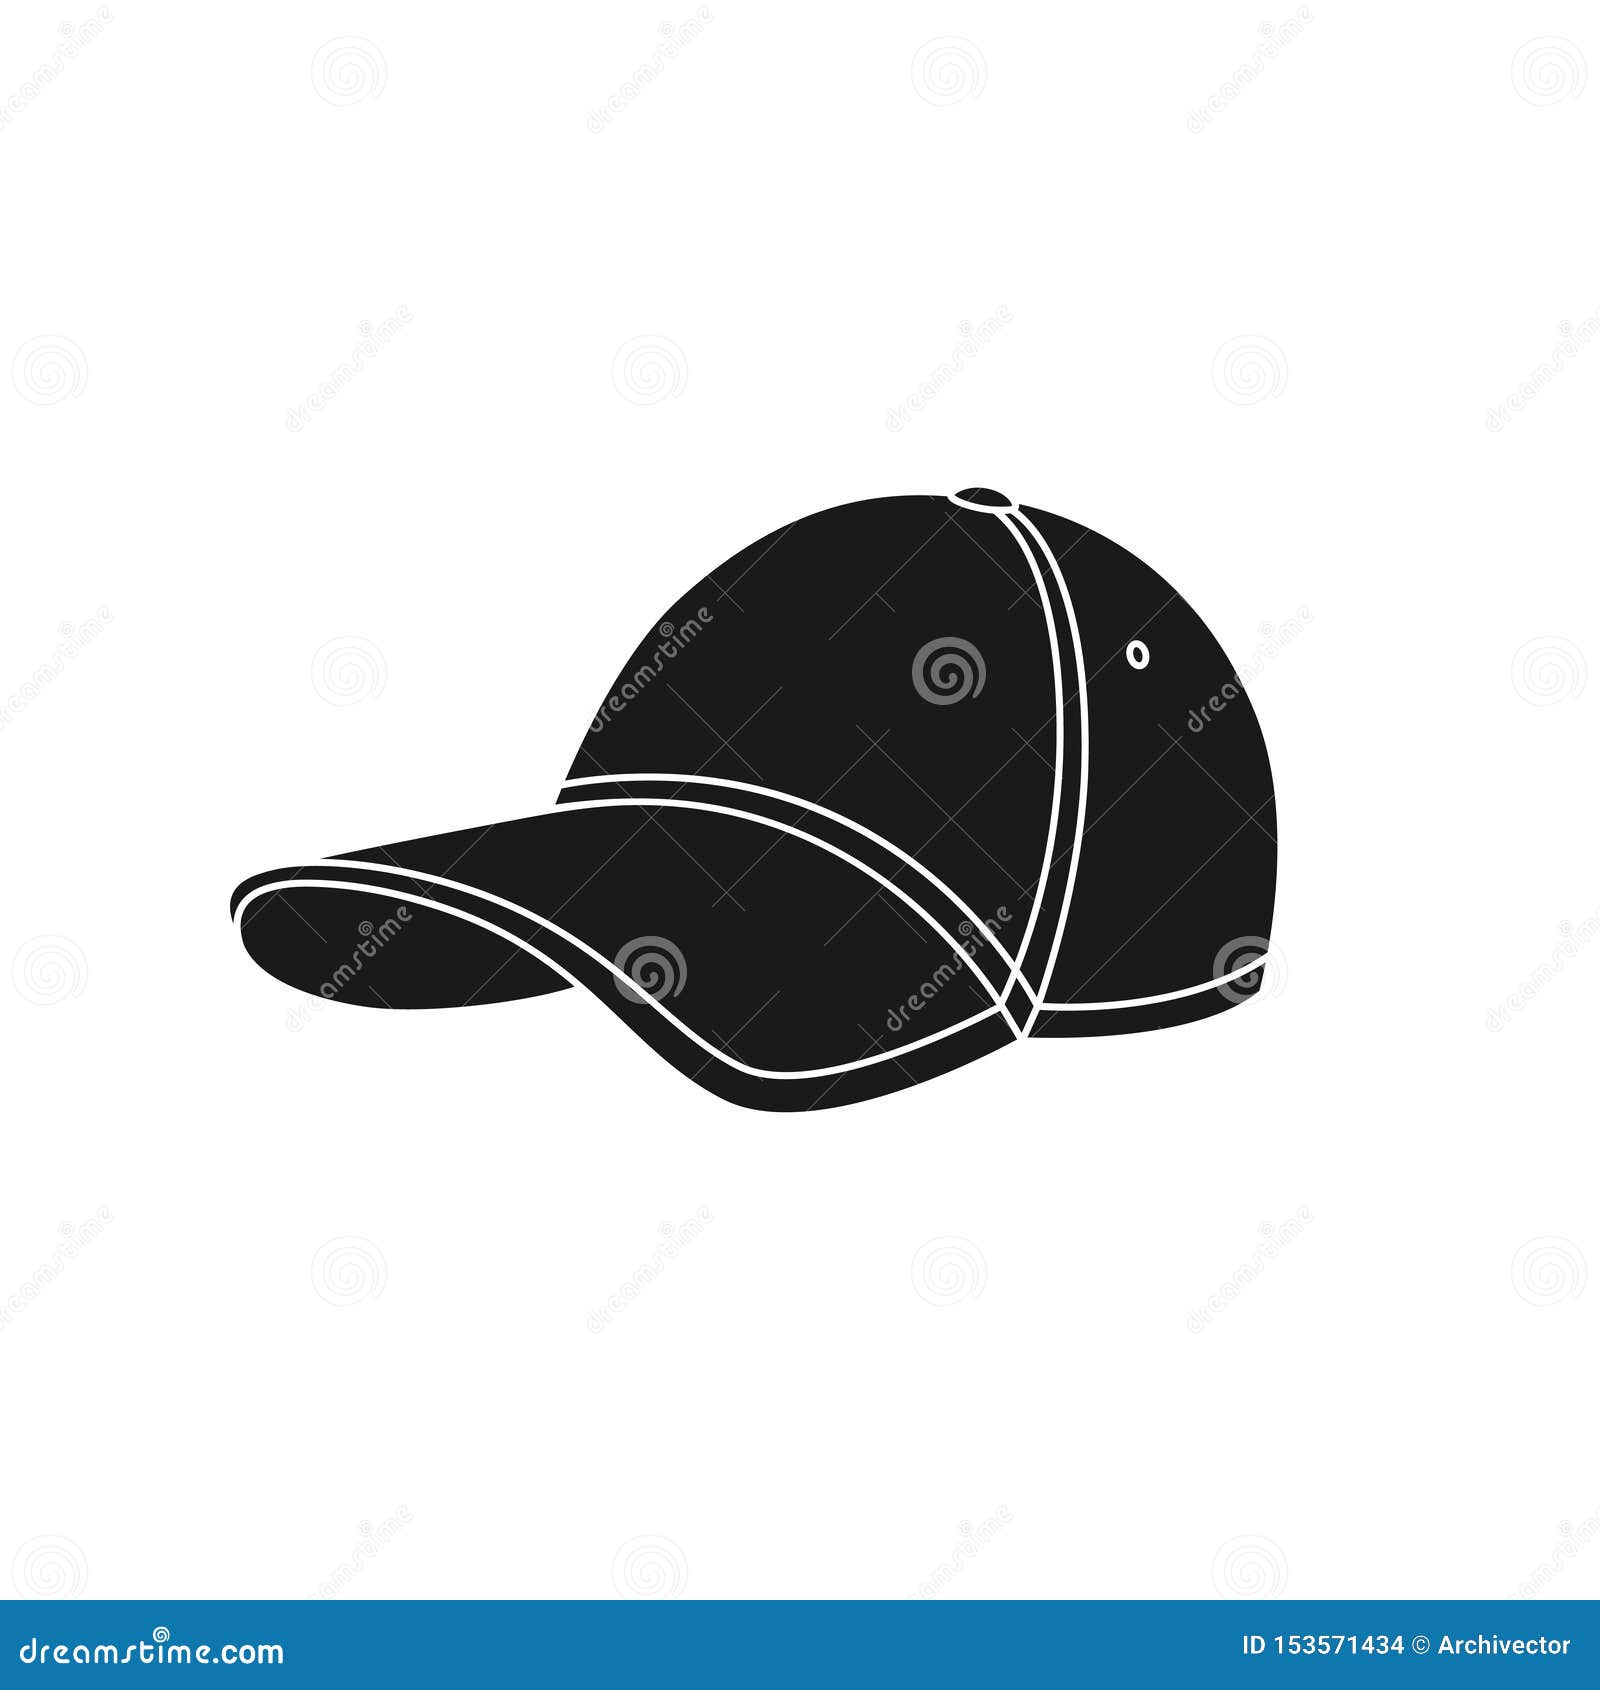 Graphic Sign Baseball Cap Isolated on White Background Stock Vector ...